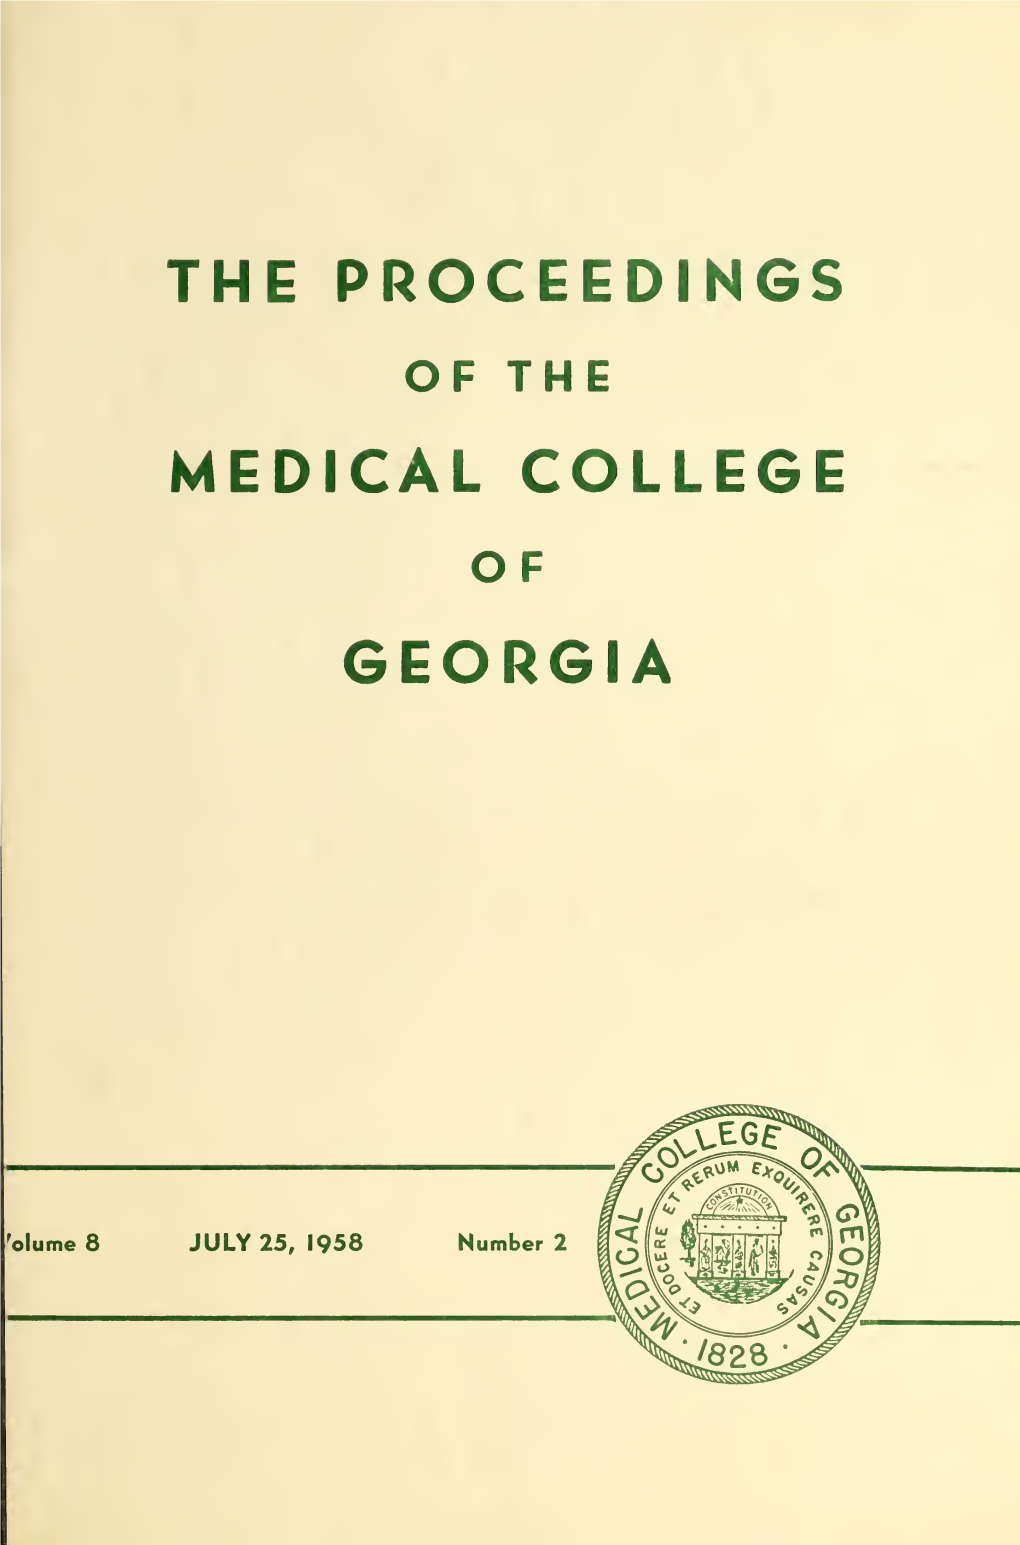 The Proccedings of the Medical College of Georgia